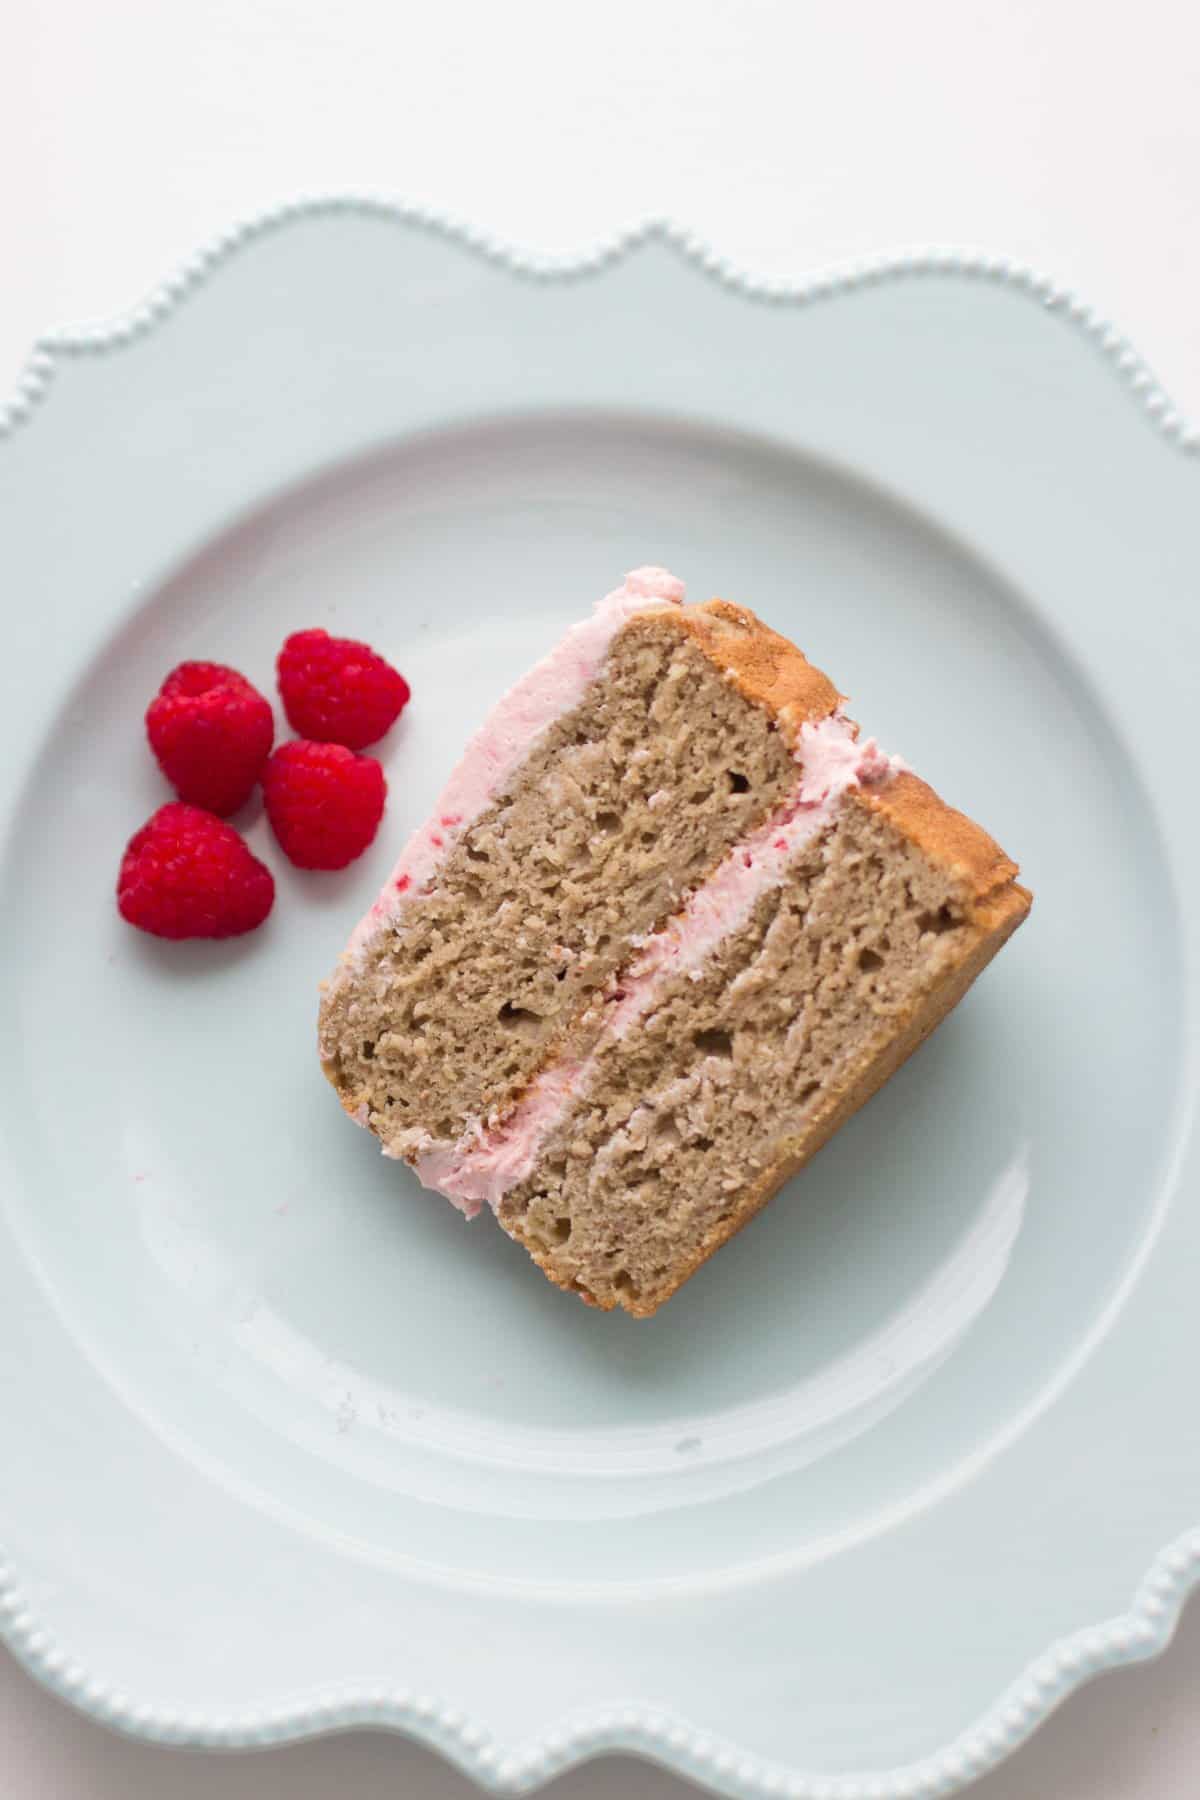 a sliced piece of cake on a blue plate with fresh raspberries on the side.